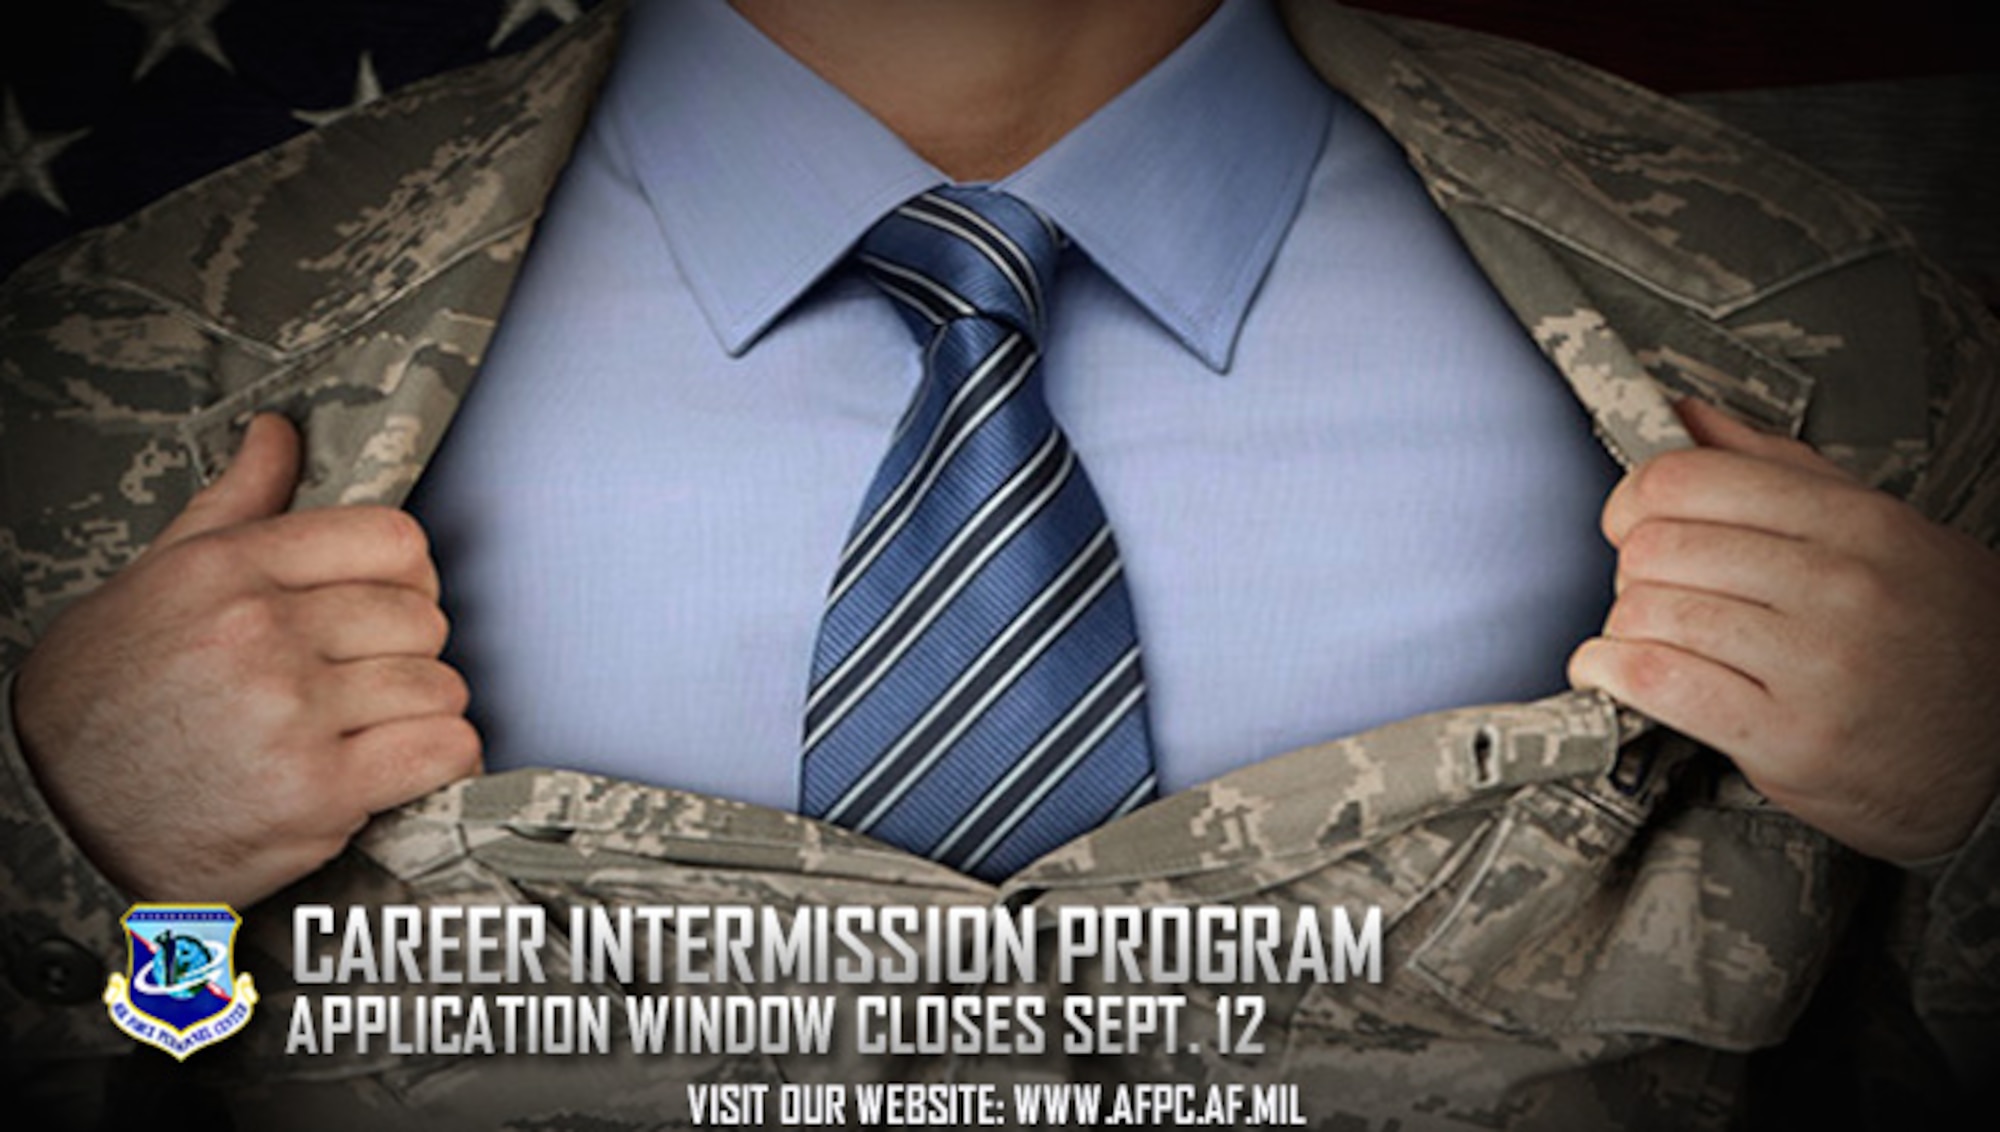 The Air Force Career Intermission Program gives Airmen a one-time temporary transition from active duty to the IRR to meet personal or professional needs outside the service. The application window closes Sept. 12, 2016. (U.S. Air Force graphic by Staff Sgt. Alexx Pons)